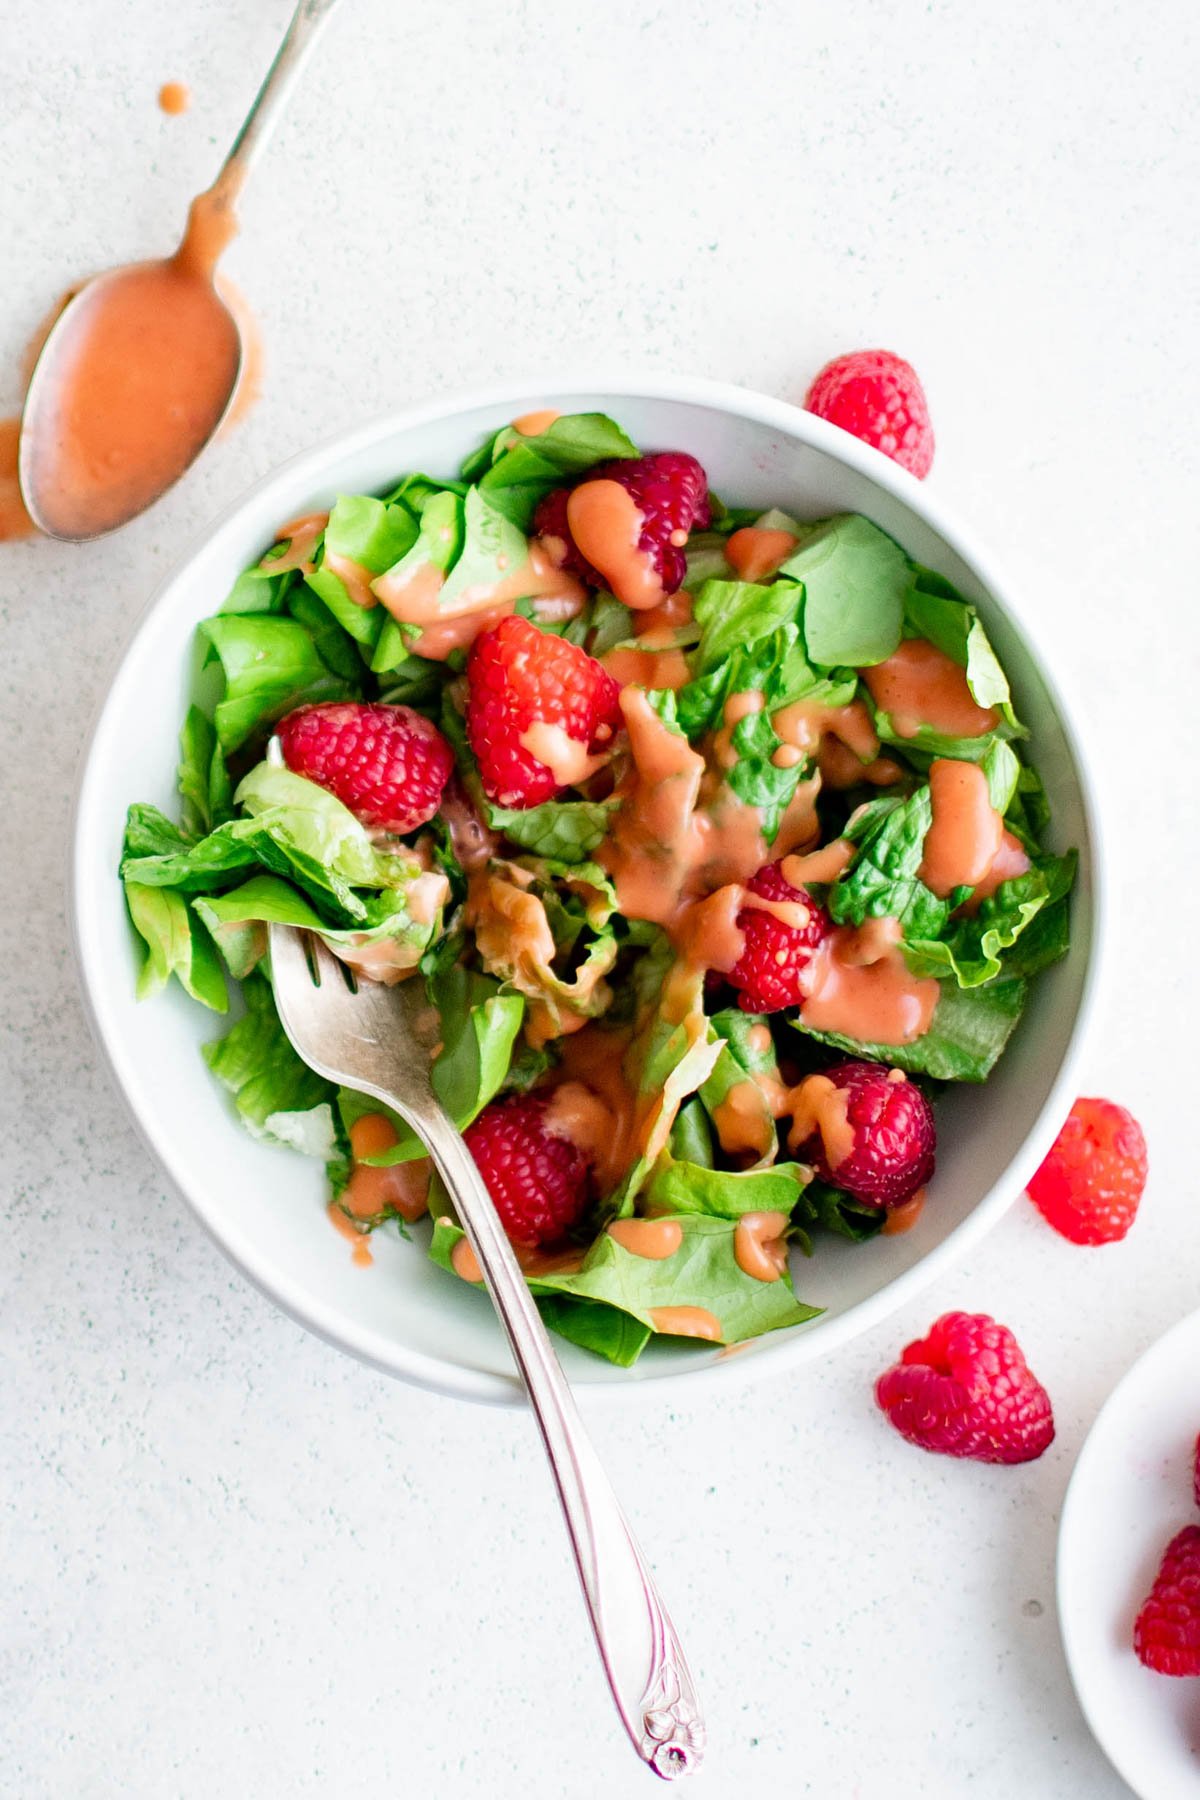 Salad with raspberries, and raspberry vinaigrette and a fork.